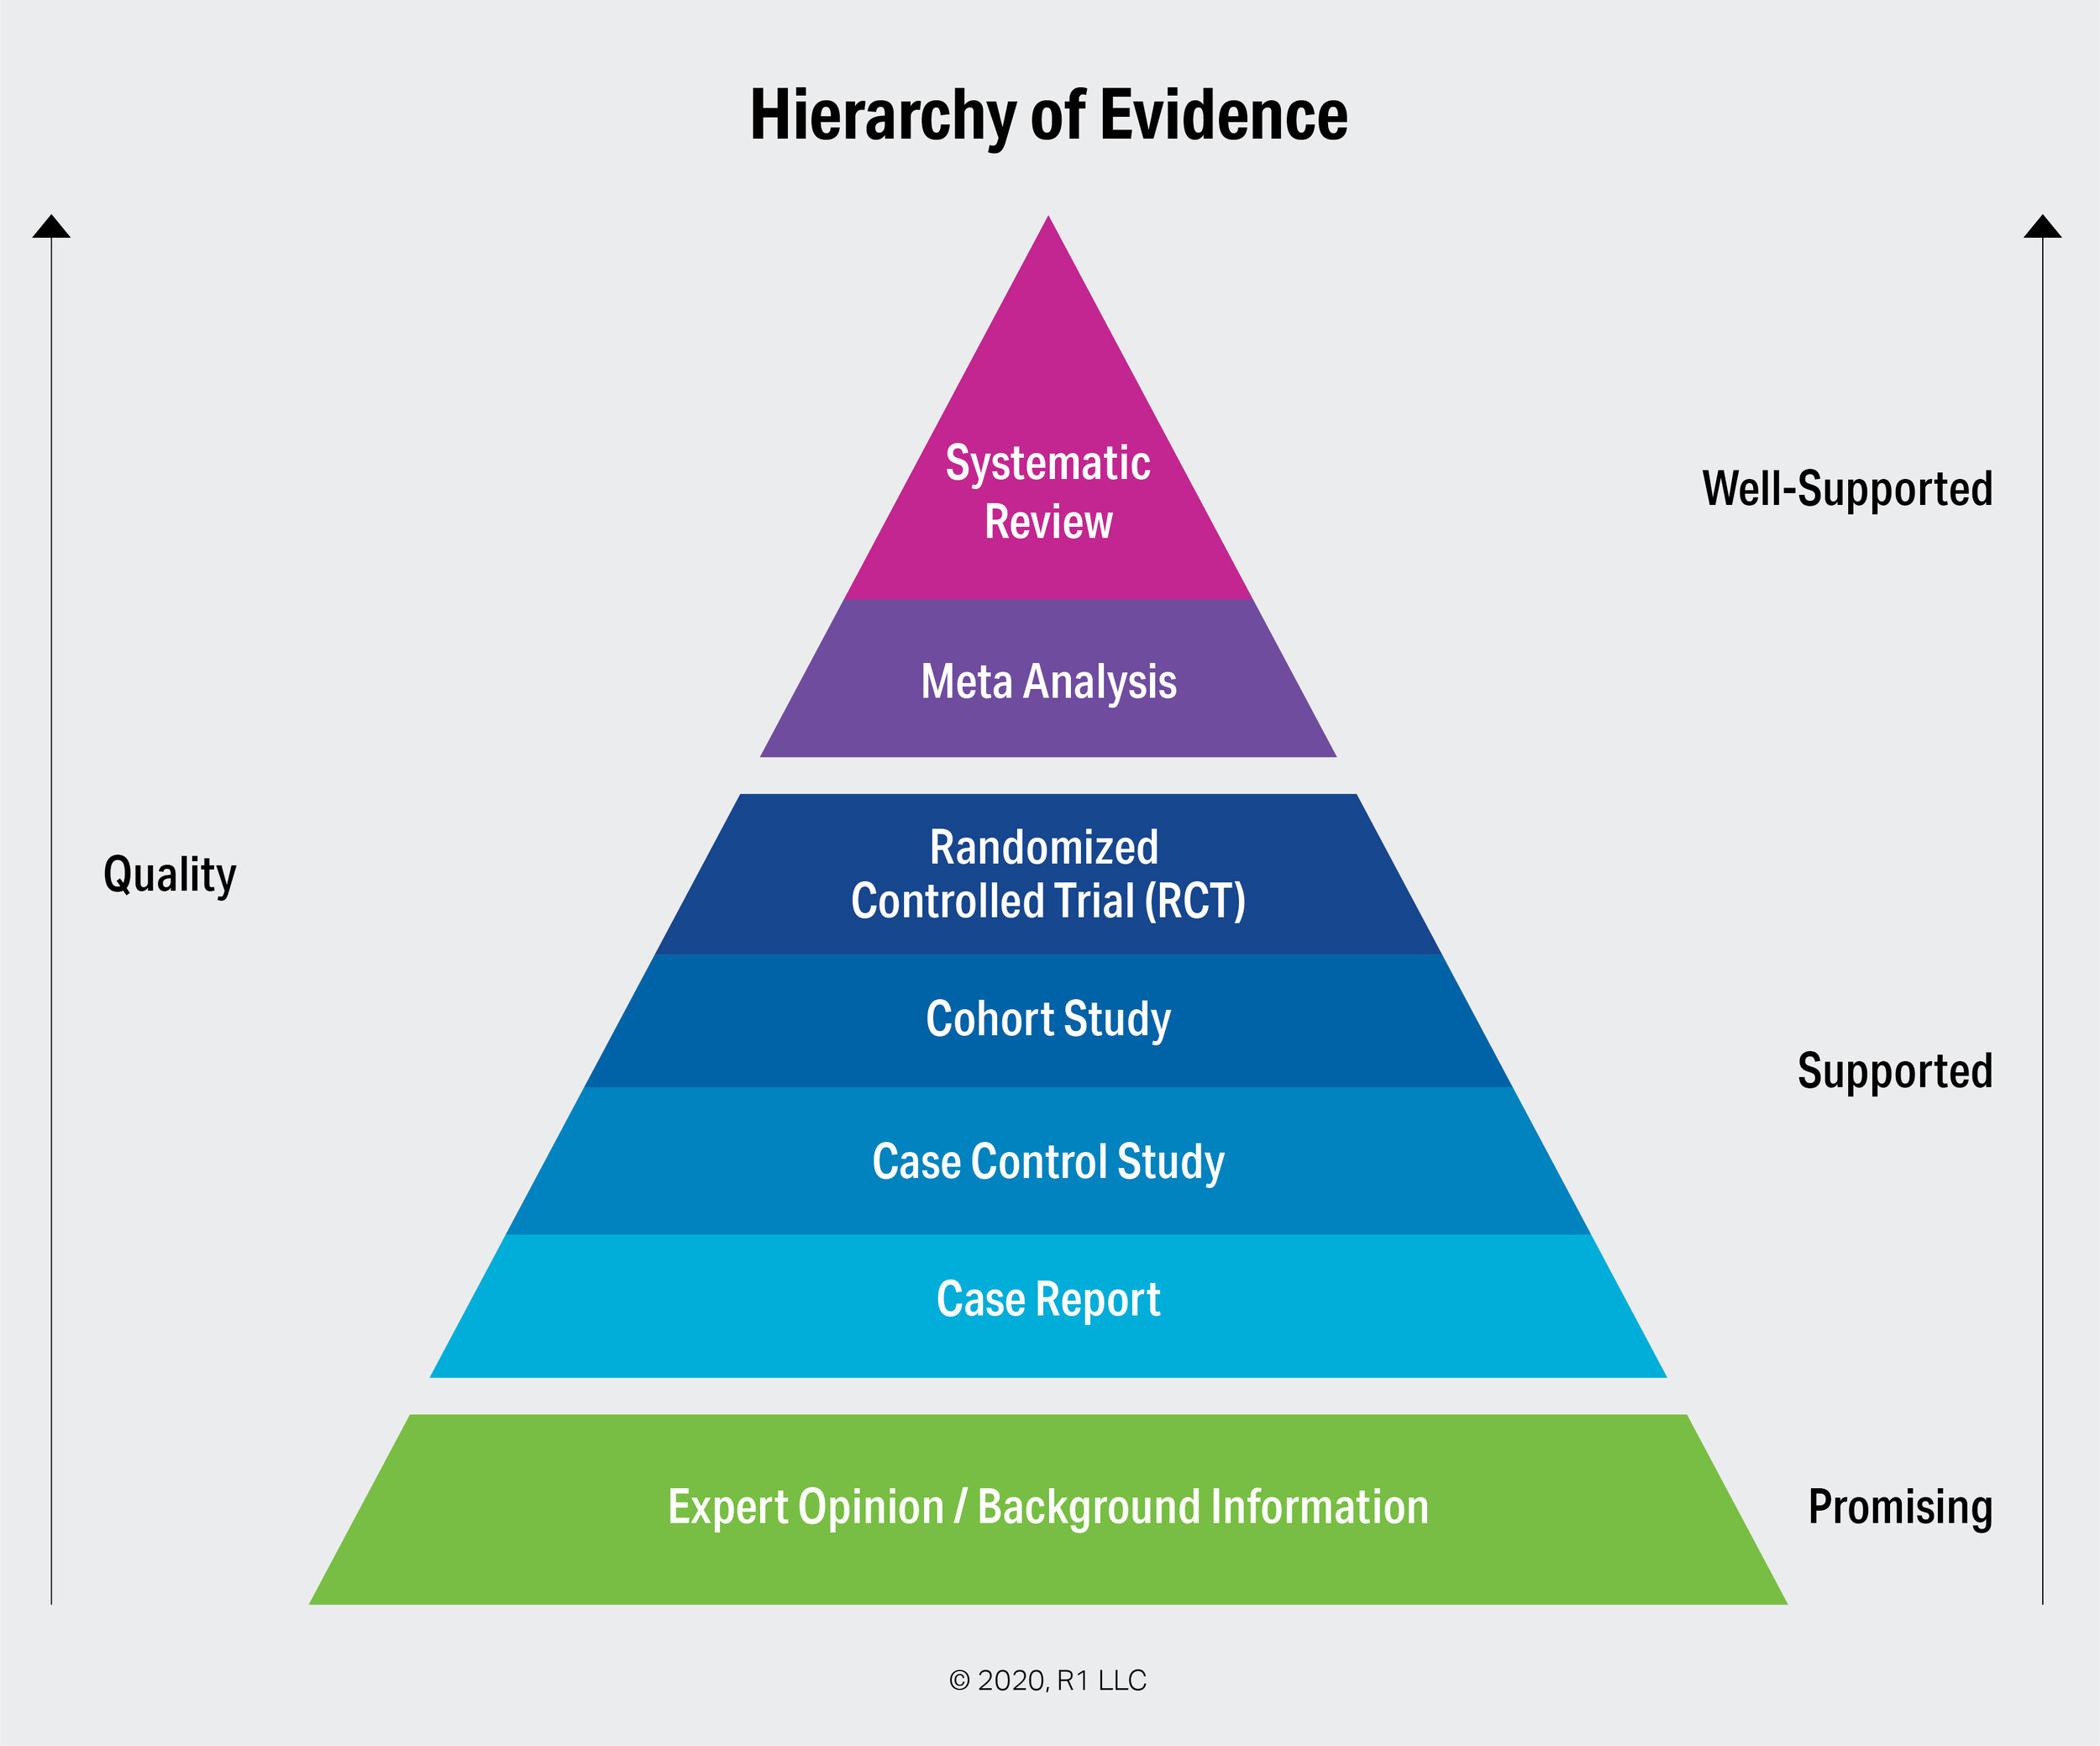 case study on evidence based policy